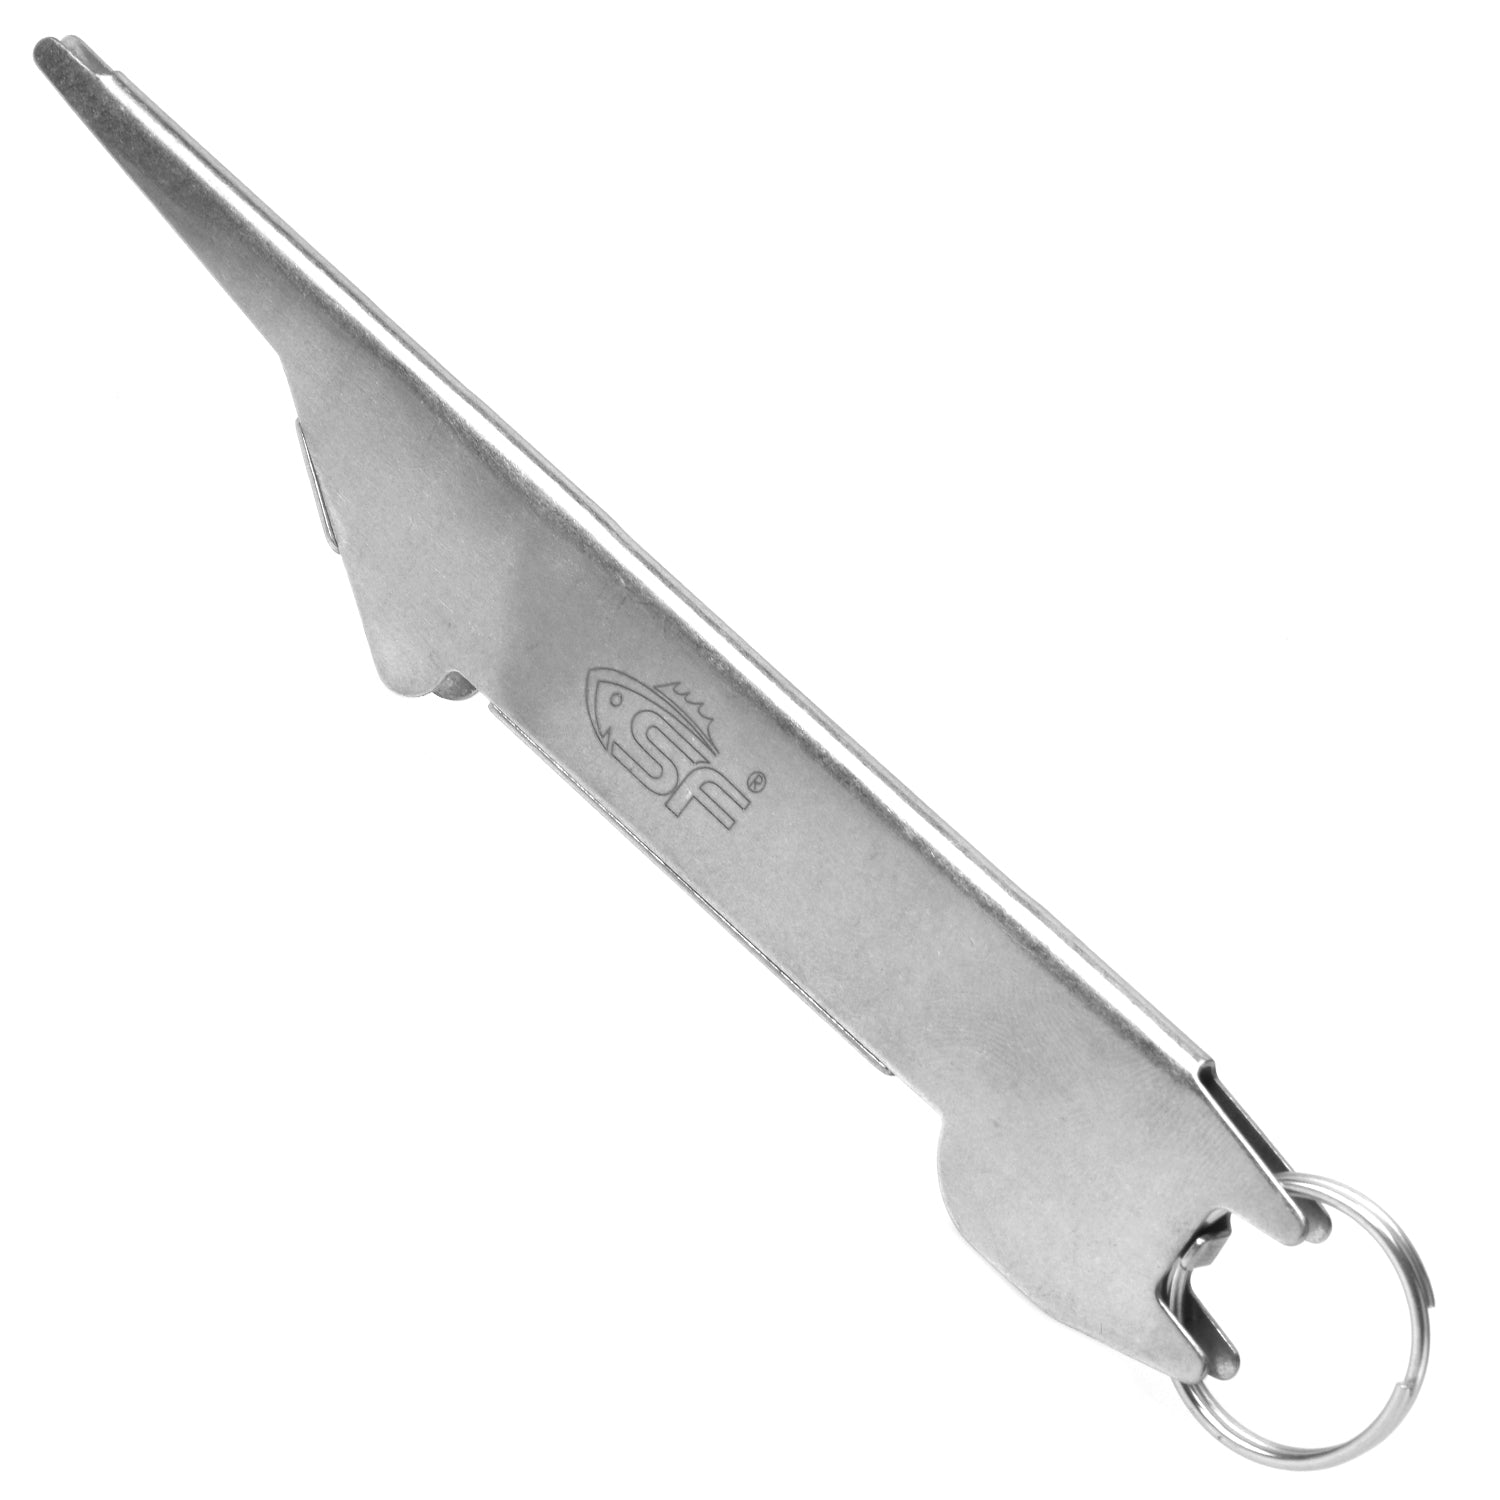 Fisherman's 3-in-1 Knot-Tying Tool - Lake Products LLC